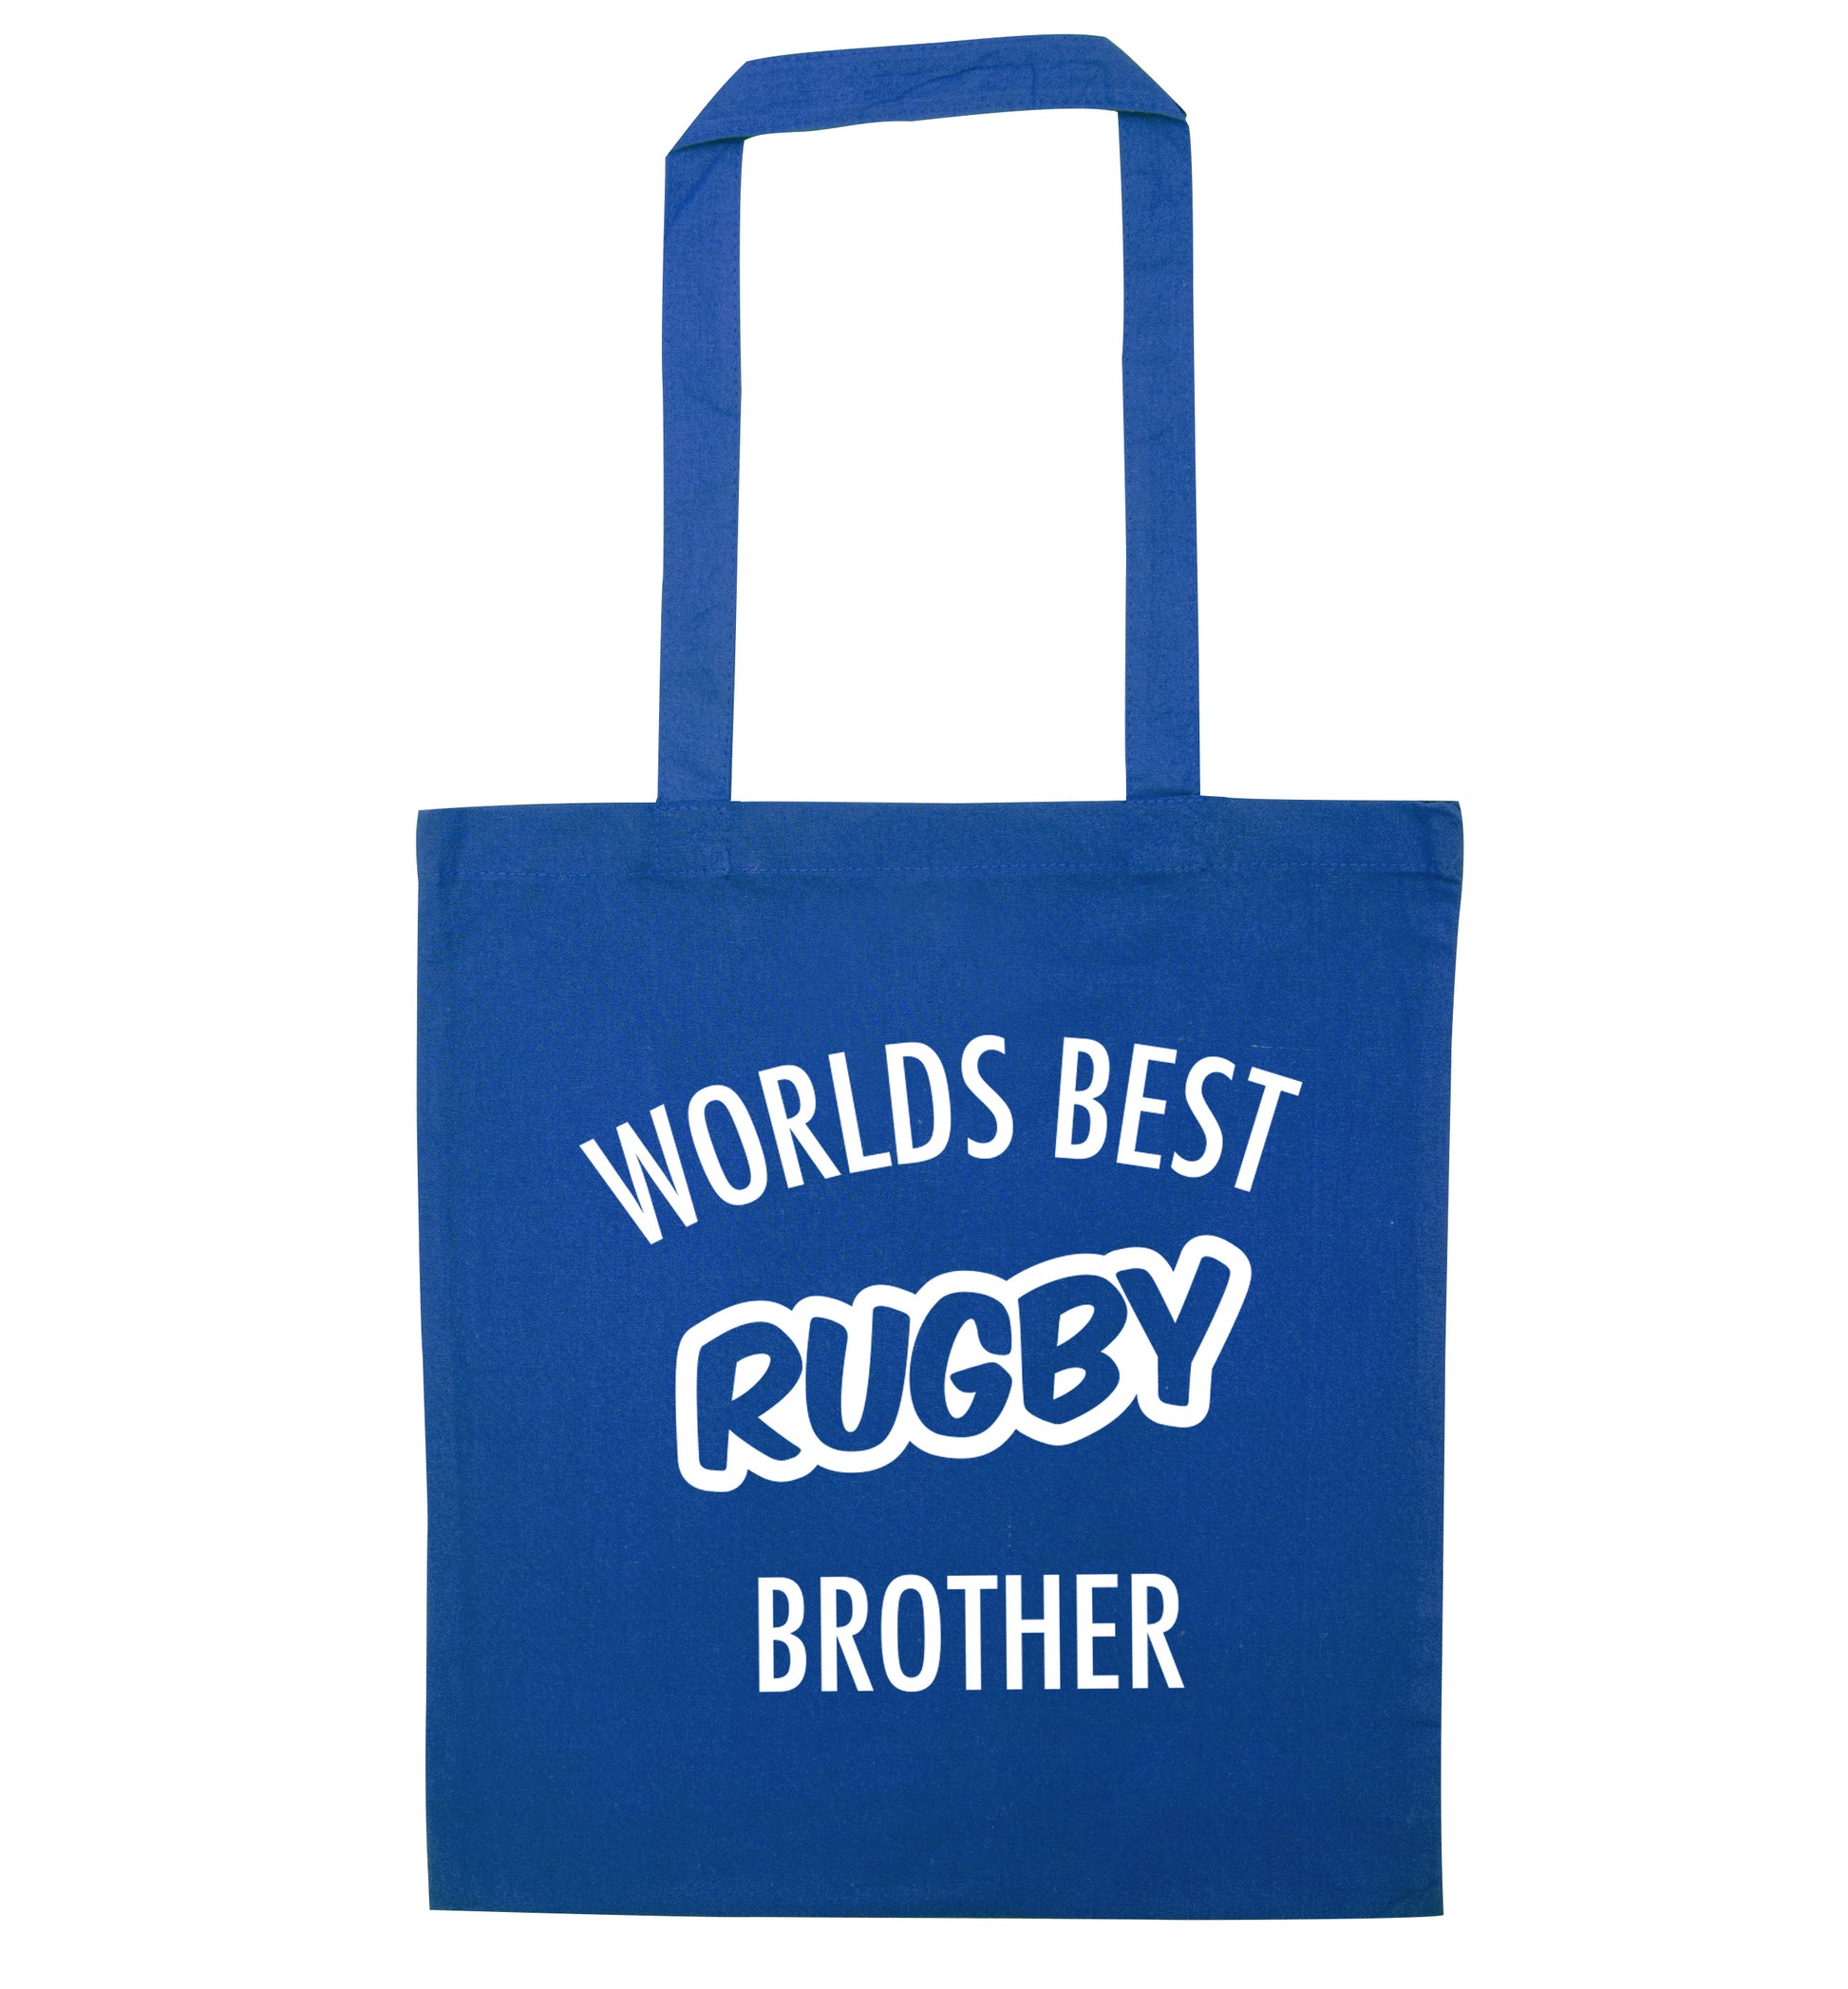 Worlds best rugby brother blue tote bag